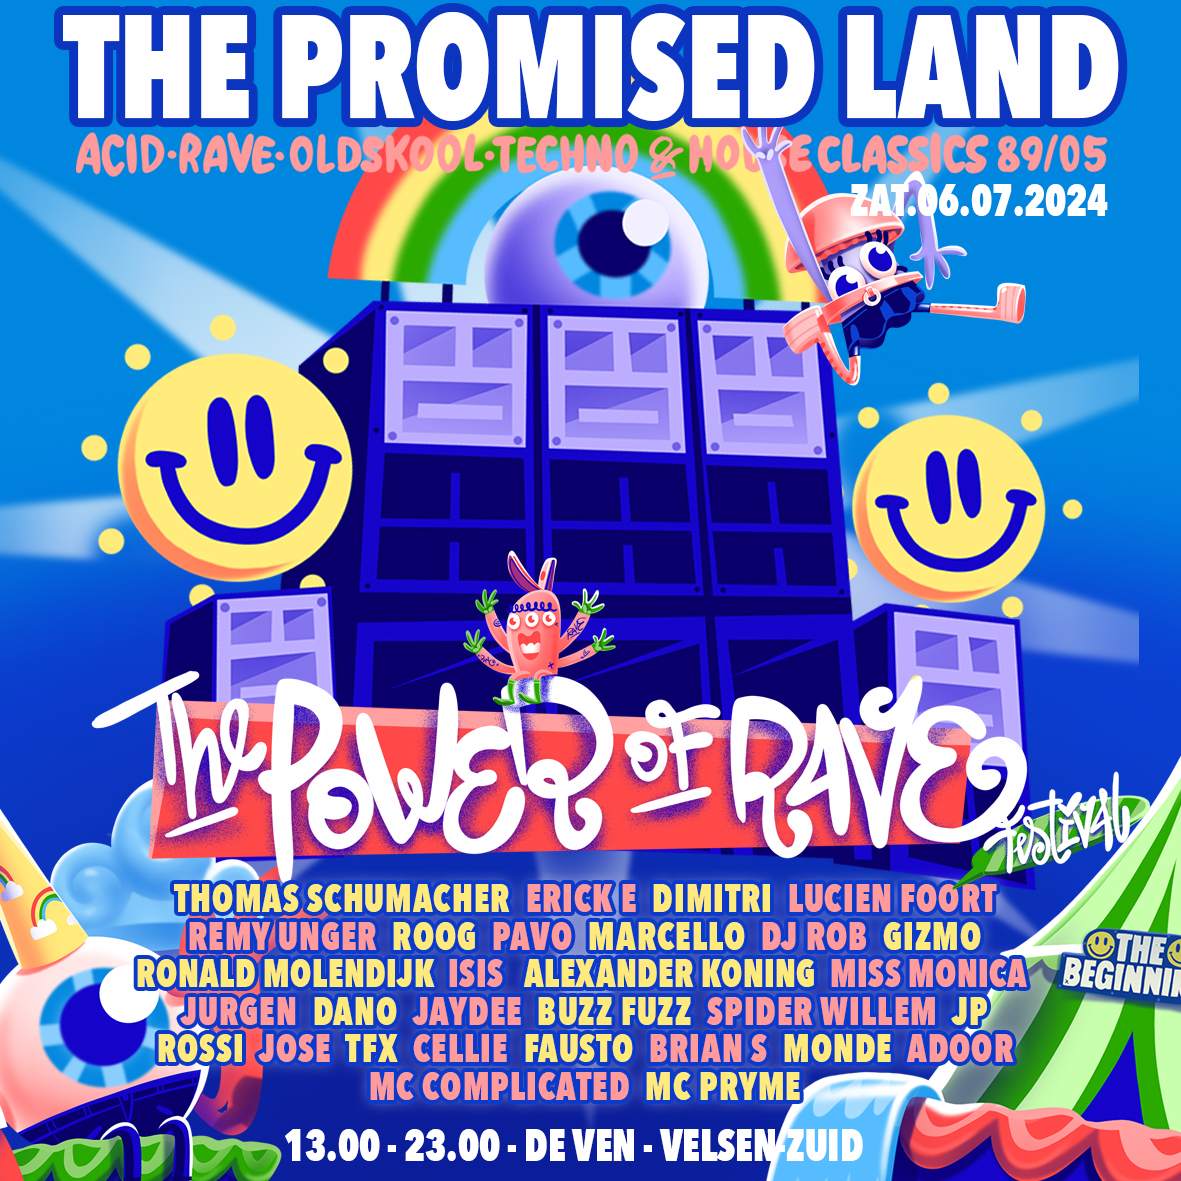 The Promised Land Festival 2024 - House, Rave, Oldstyle, Acid & techno Classics 89/05 - フライヤー裏